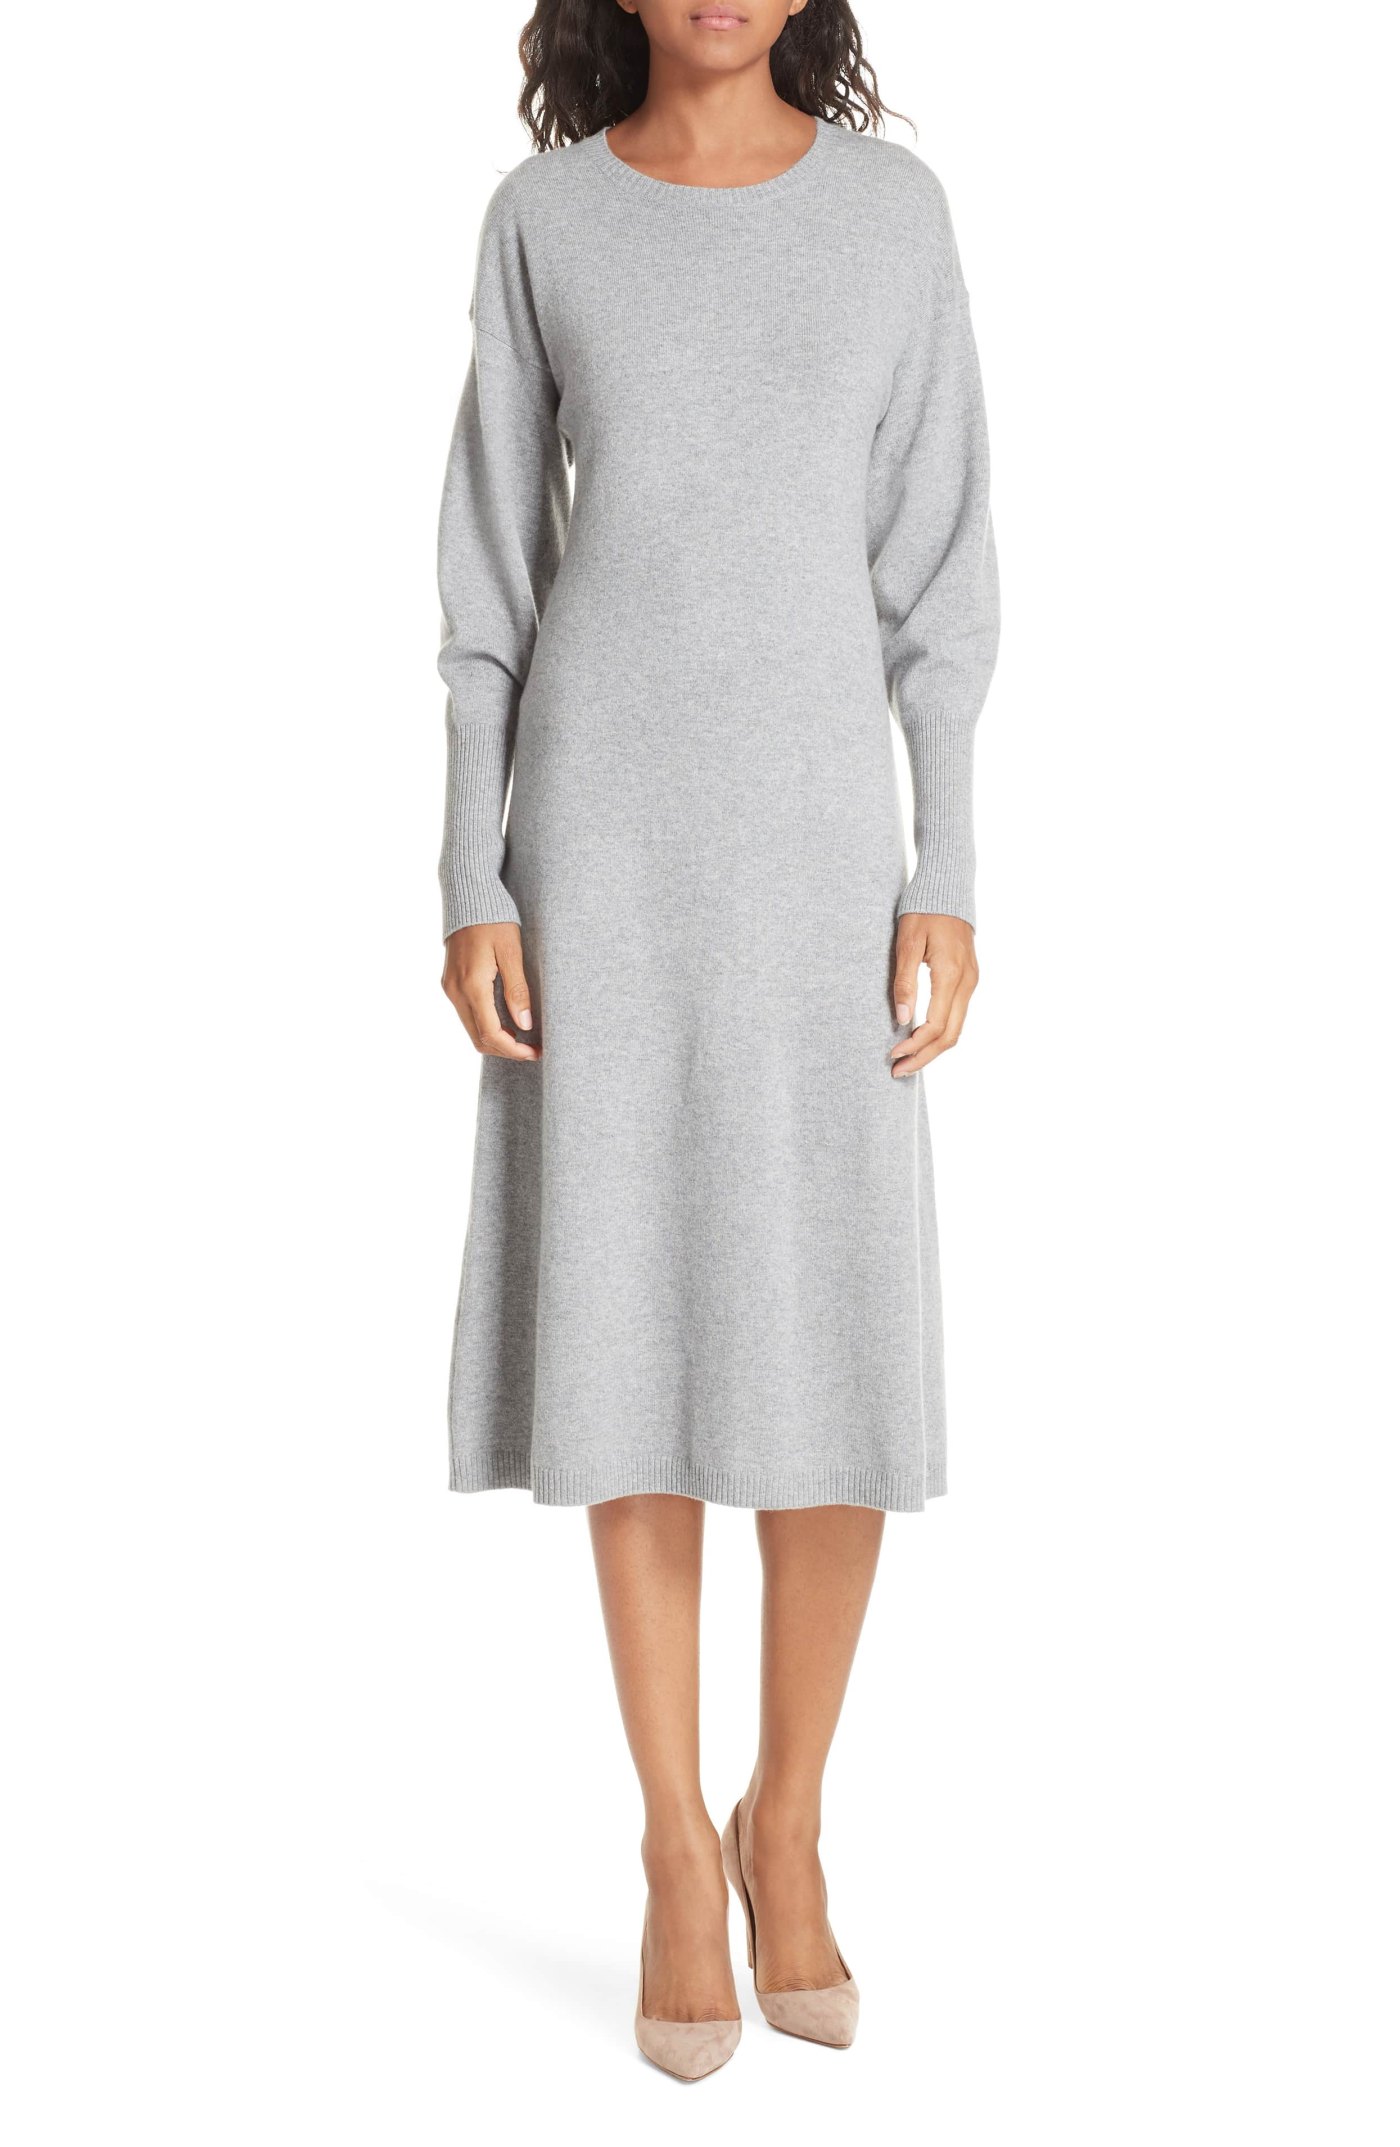 Shop the Signature Cashmere Sweater at Nordstrom | Us Weekly